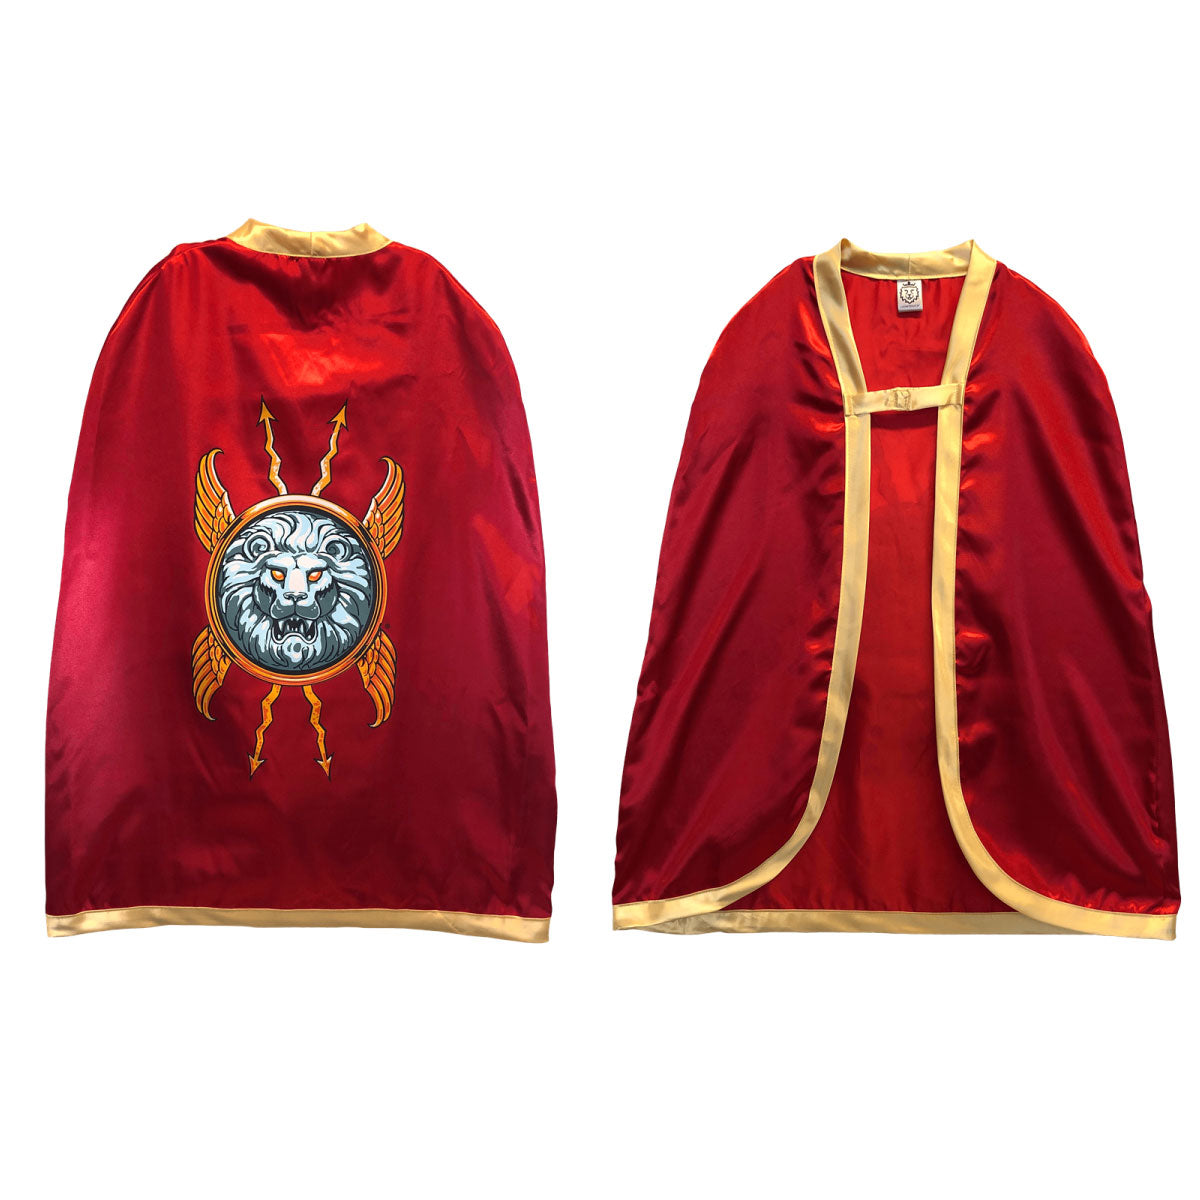 Roman Soldier Cape from Liontouch